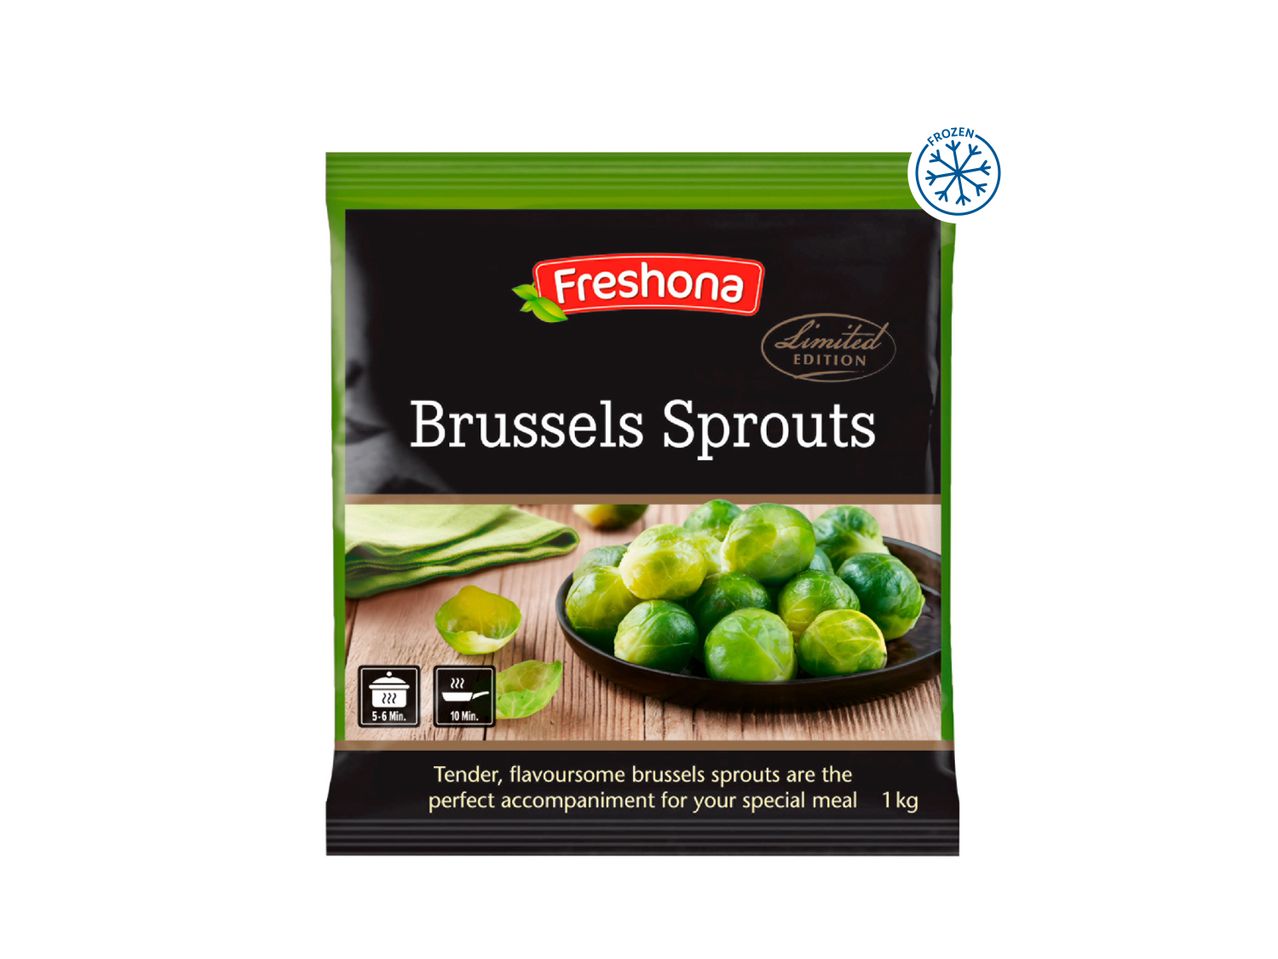 Go to full screen view: Freshona Brussels Sprouts - Image 1